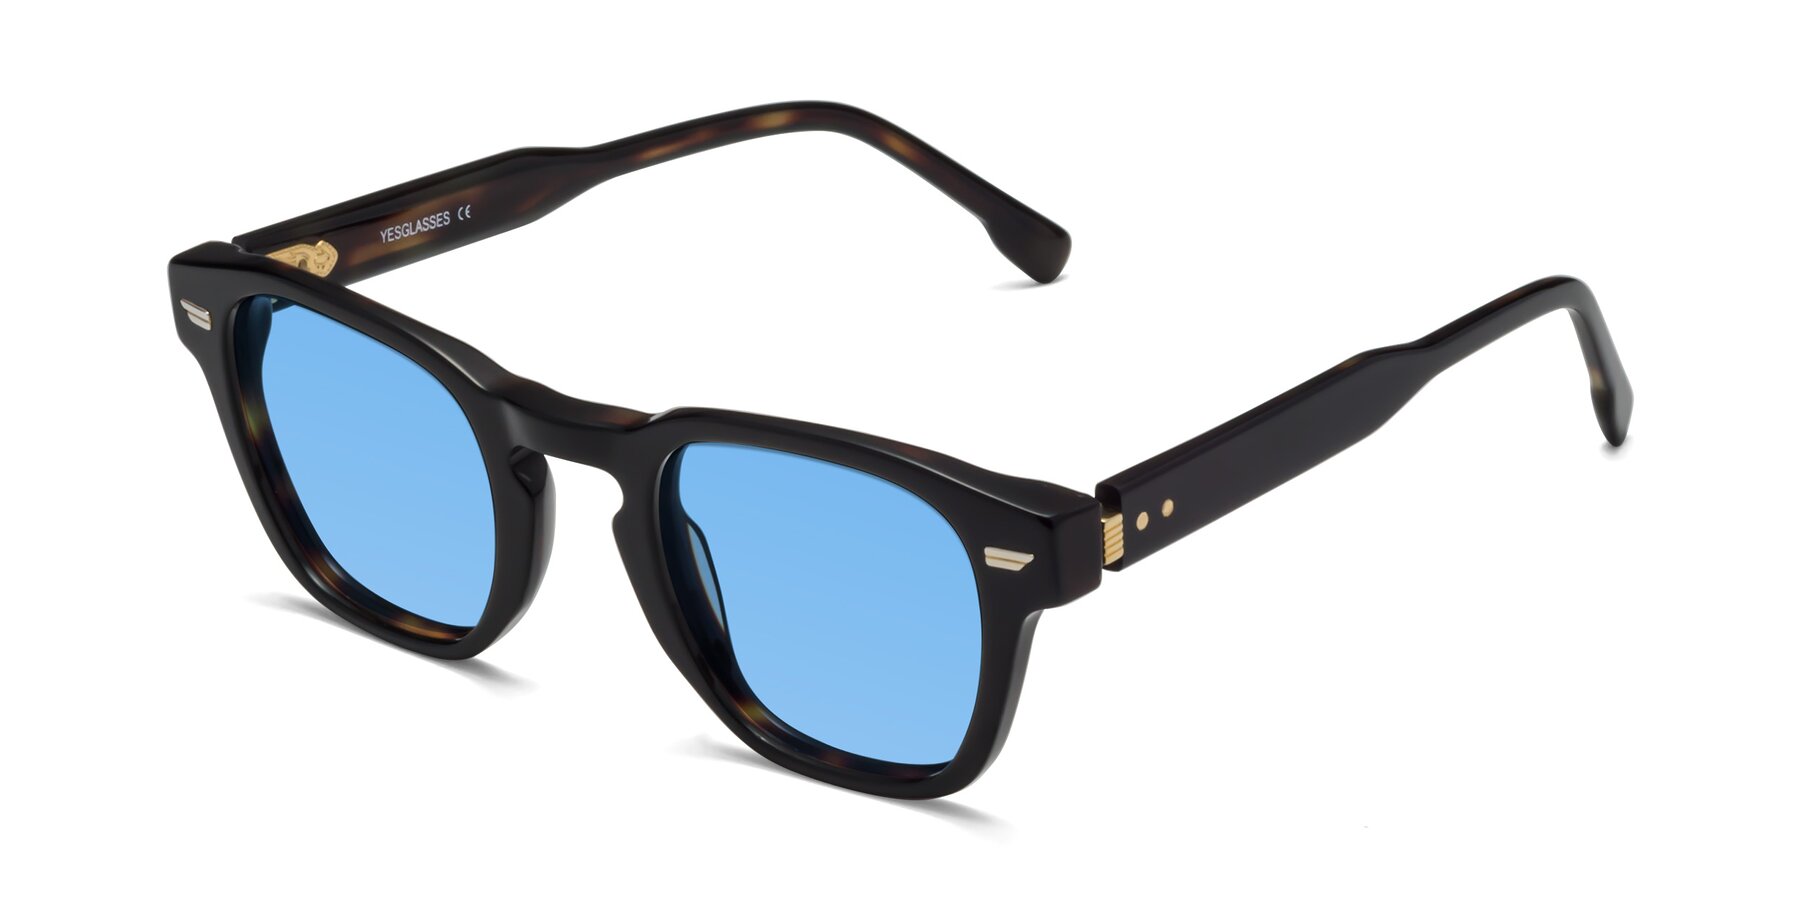 Angle of 1421 in Black-Tortoise with Medium Blue Tinted Lenses